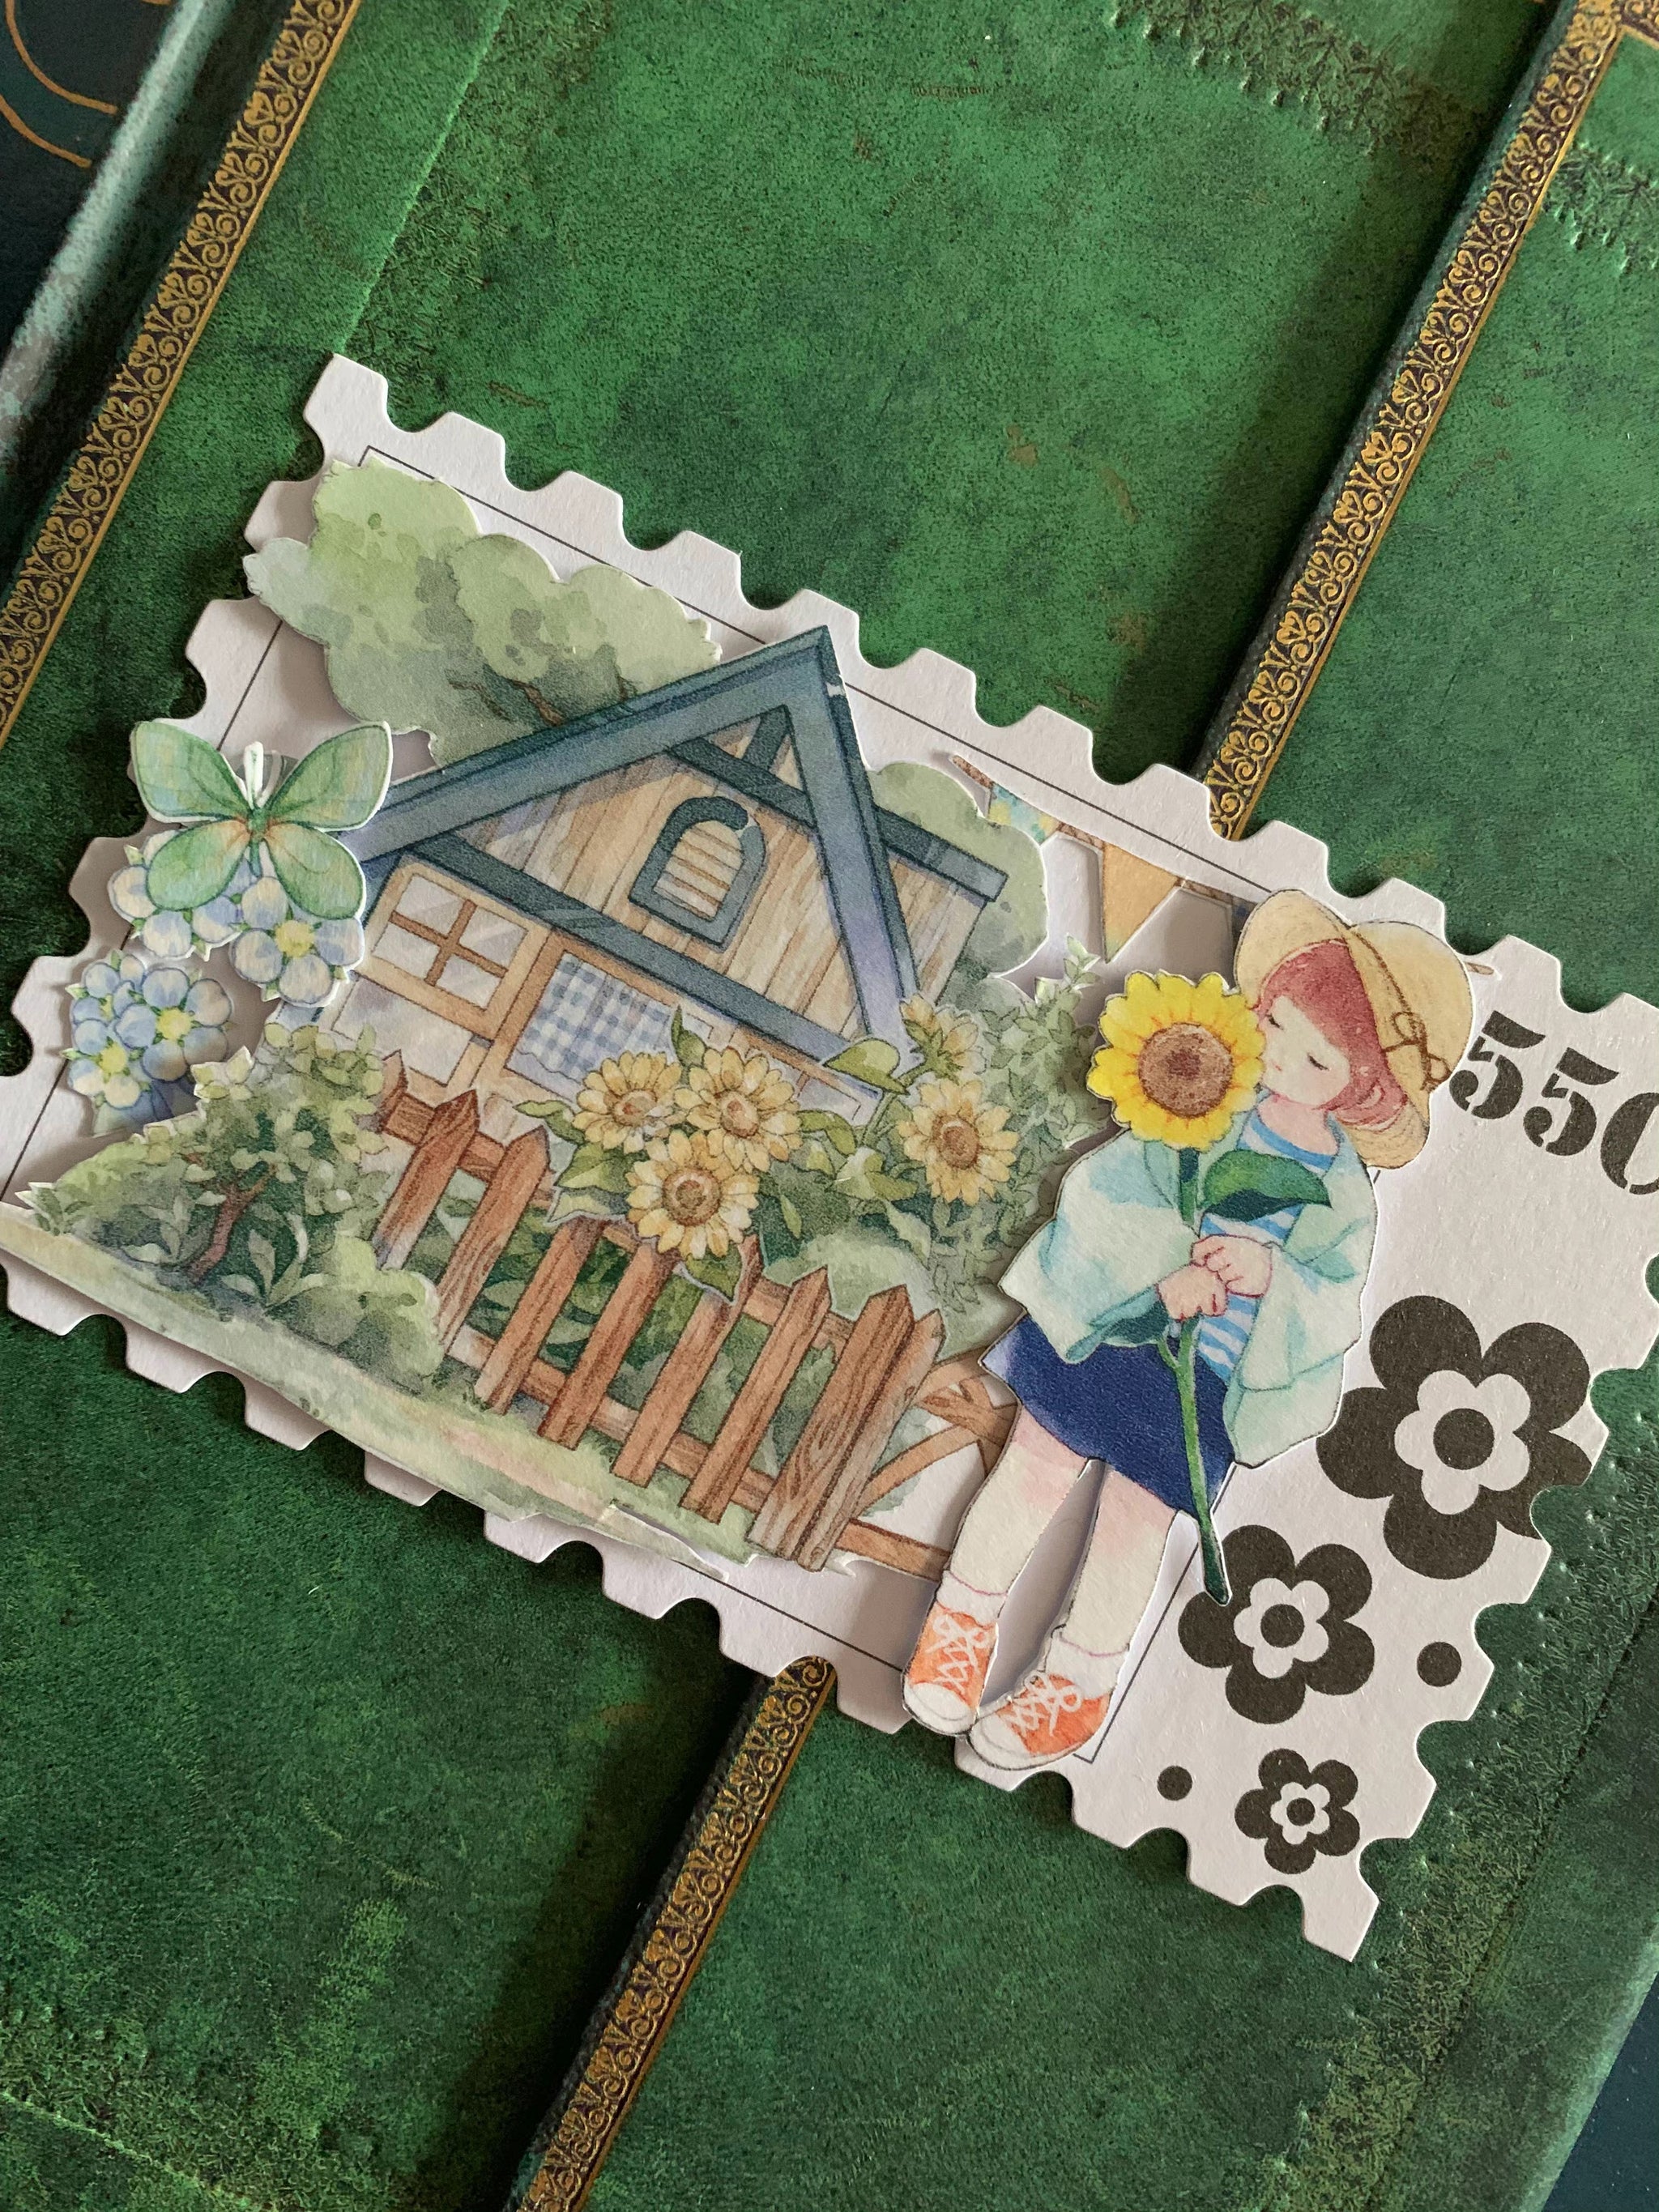 Tianxiaobao's Starry Sky: The Girls 2 Masking Tape